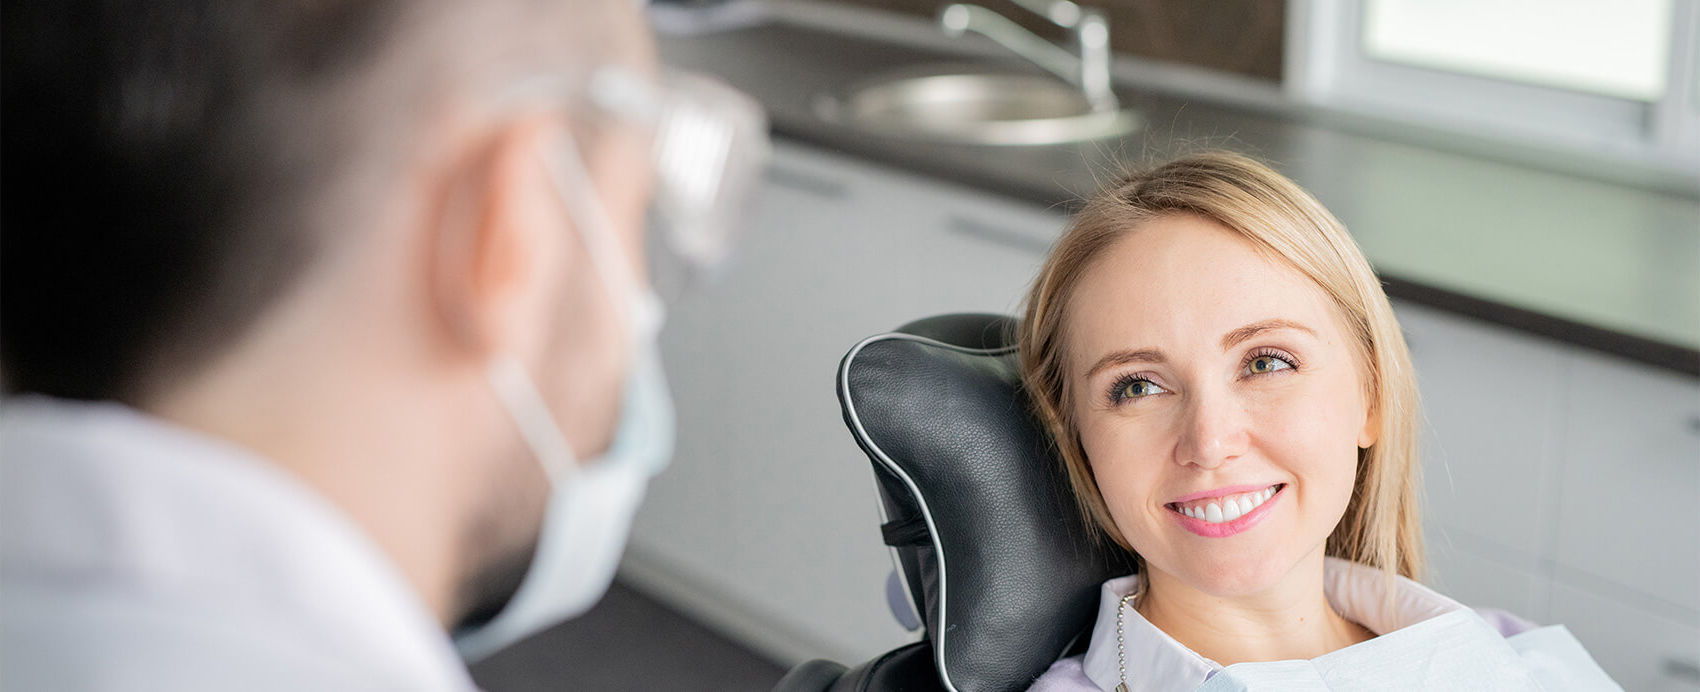 patient in dental chair smiling at dentist